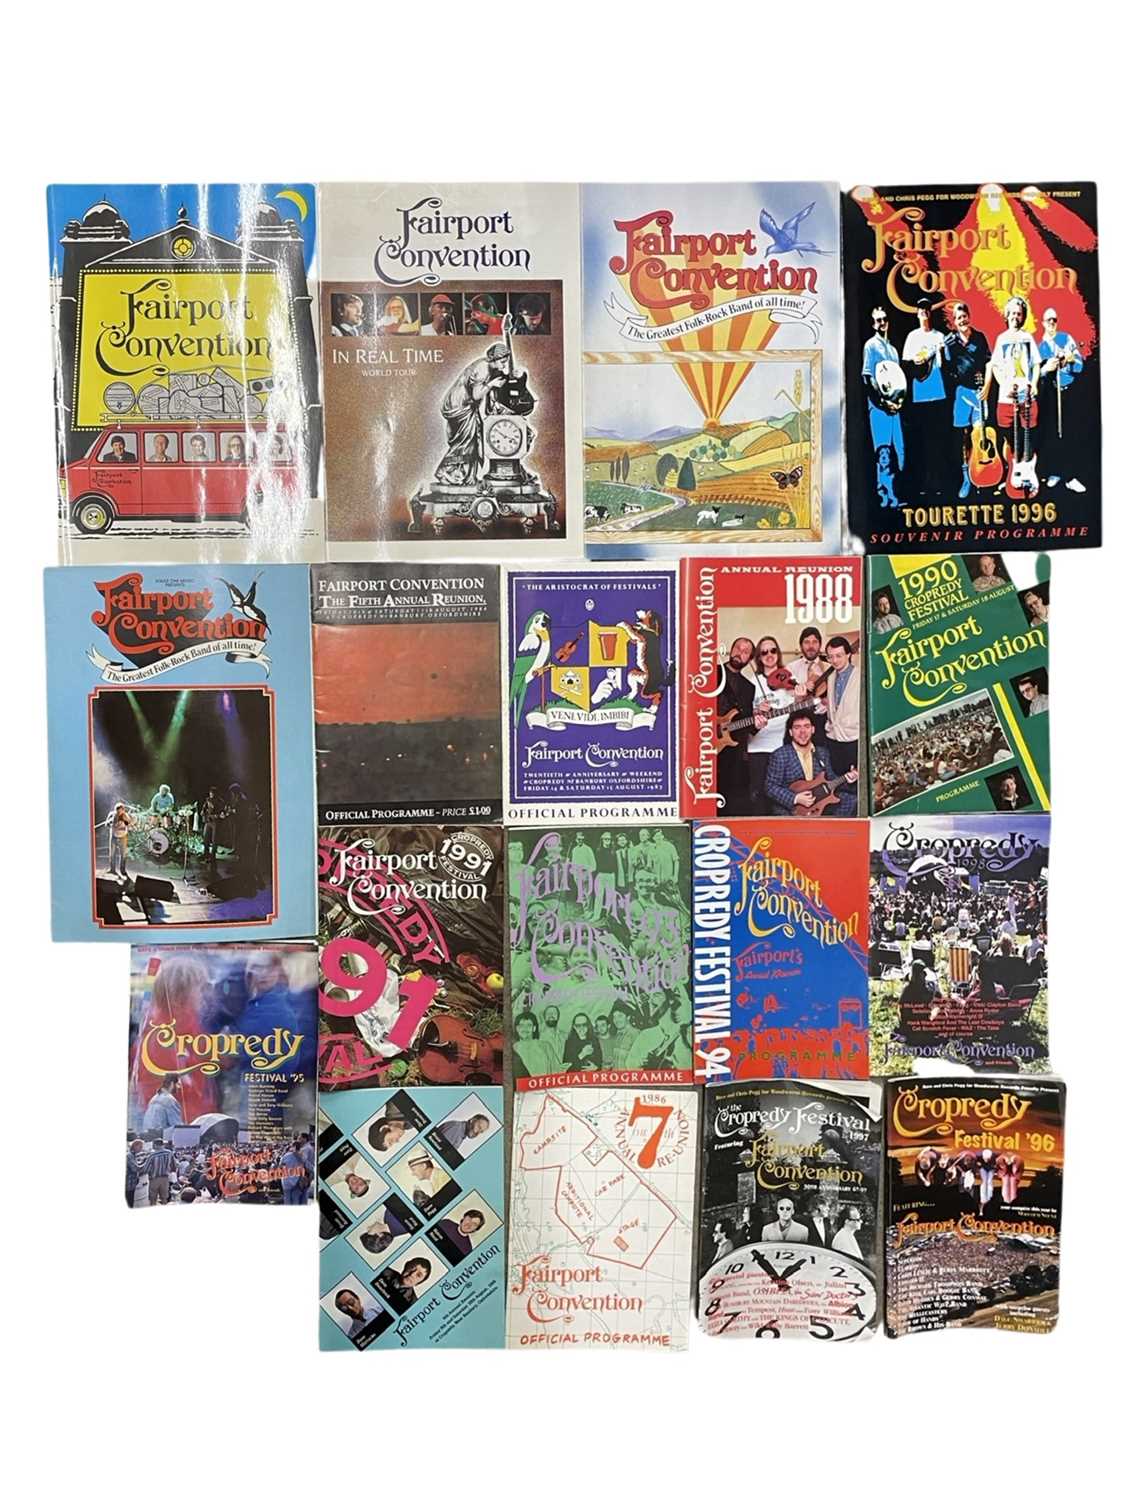 A large collection of various Fairport Convention / Cropredy Festival tour programmes.